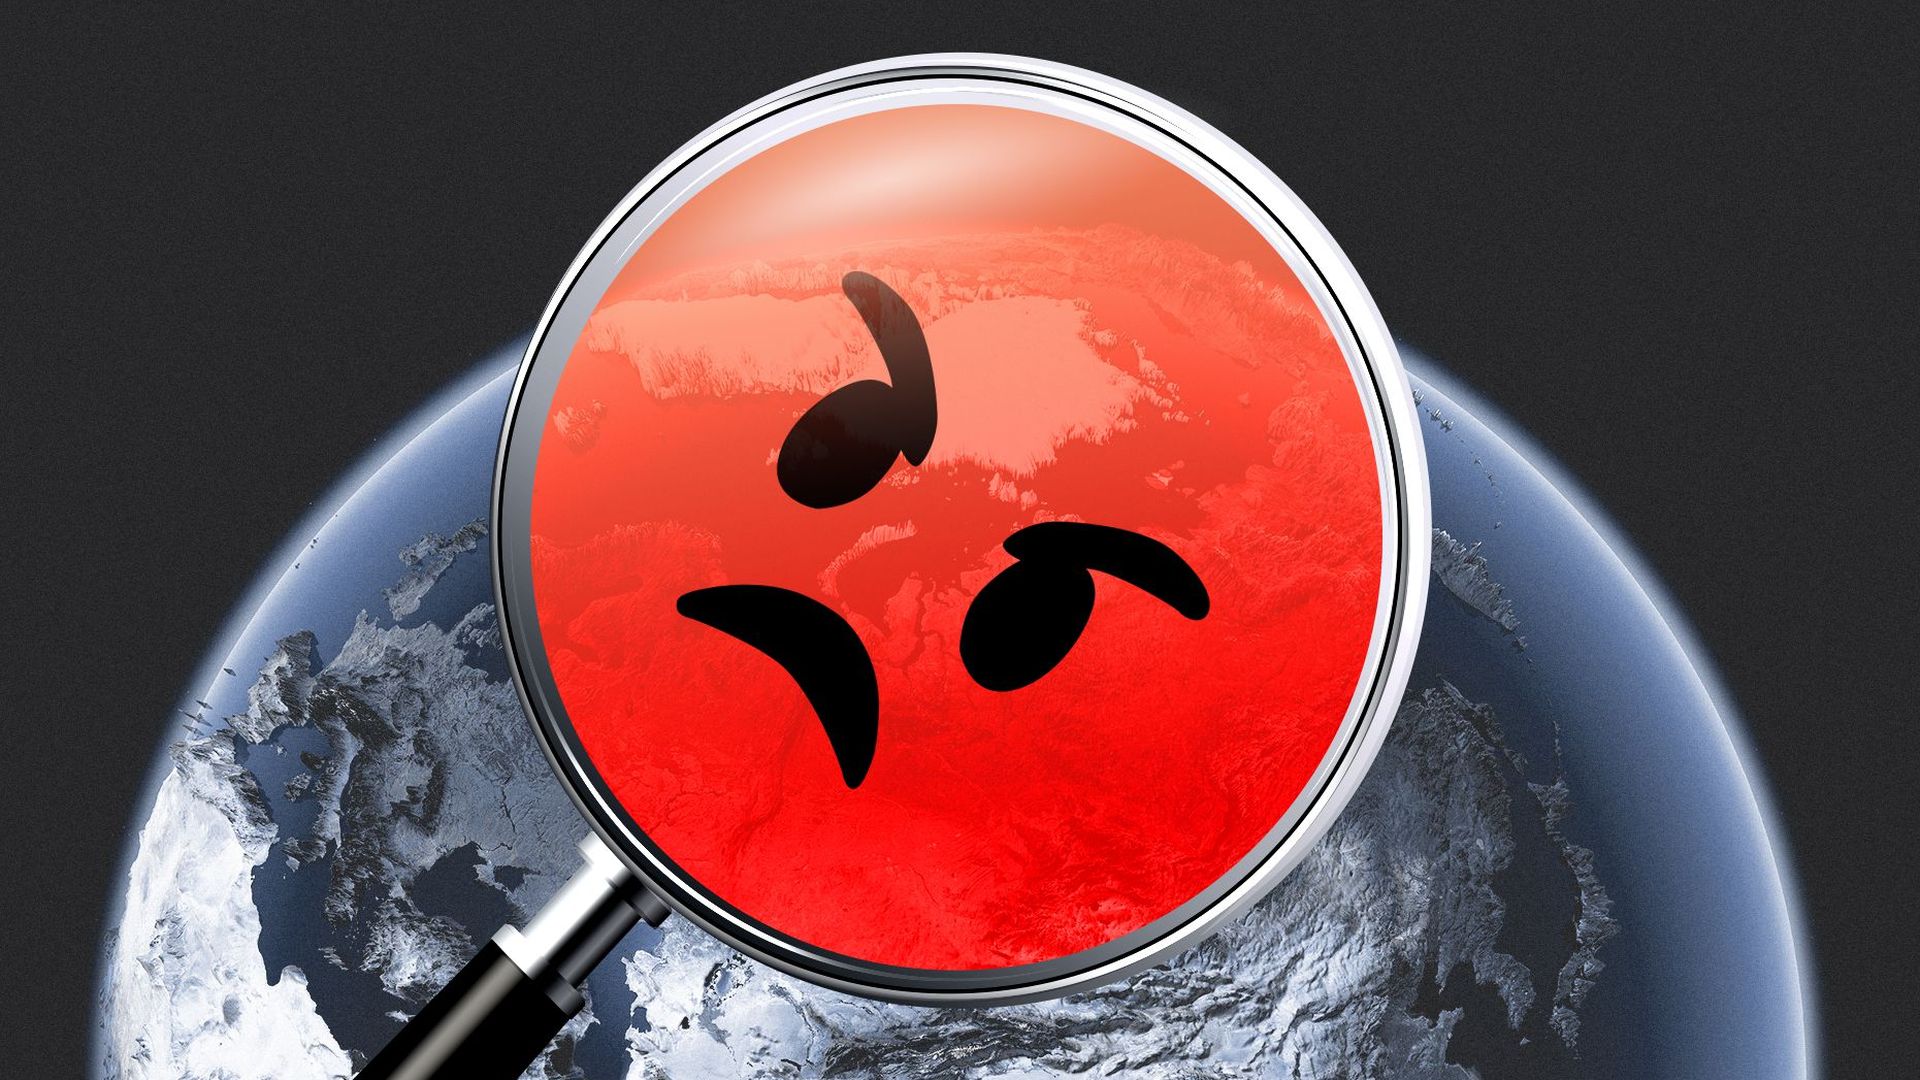 Illustration of a mad emoji face on a magnifying glass, which is examining Europe and Asia on a globe